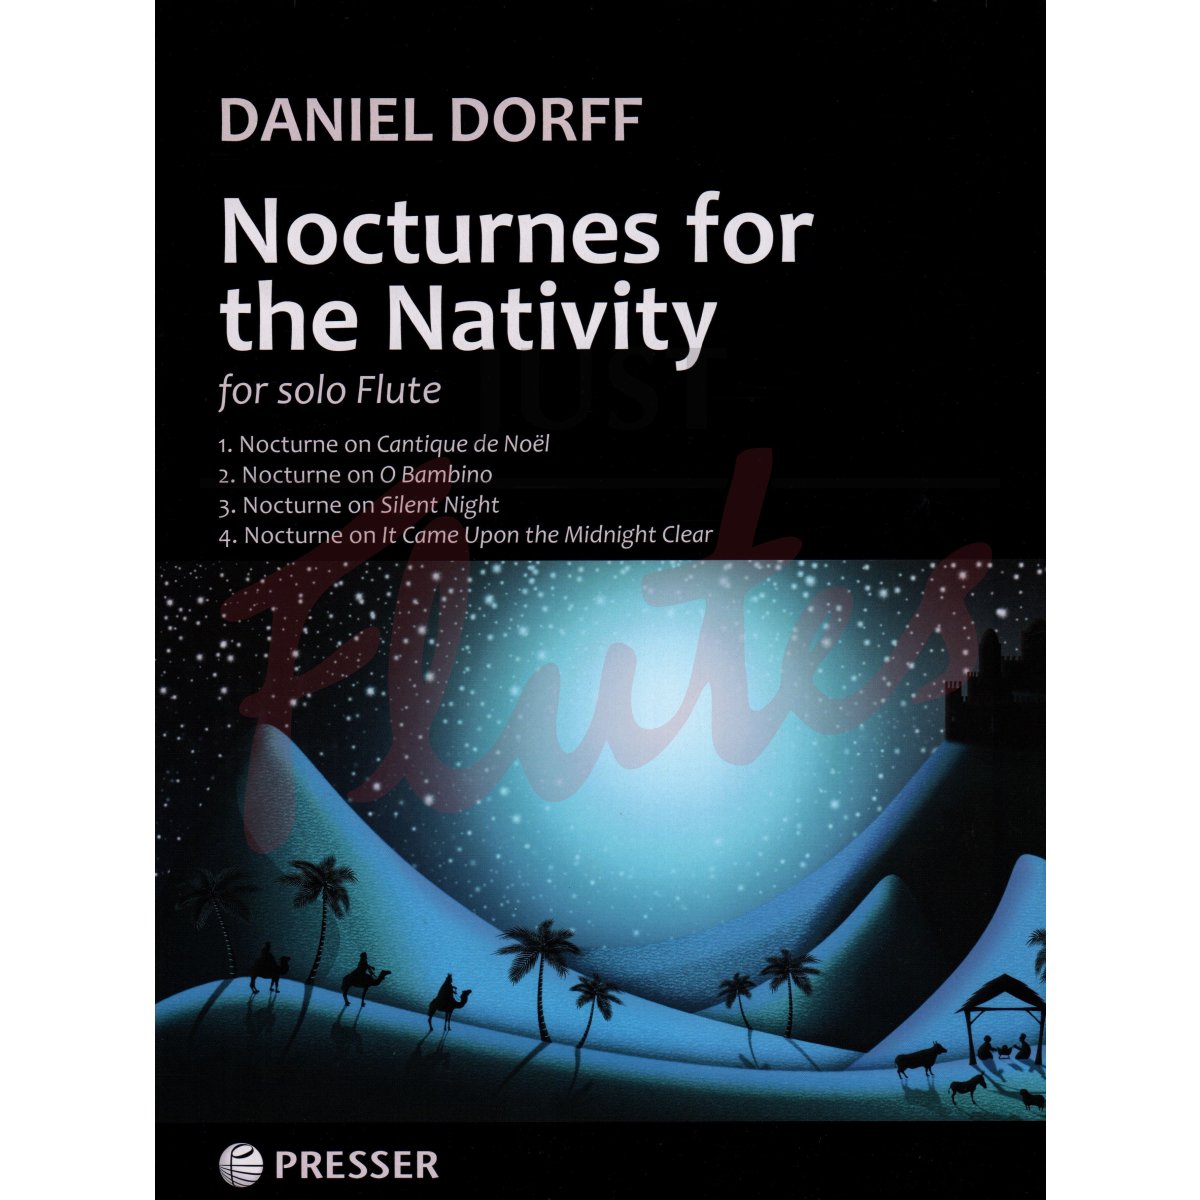 Nocturnes for the Nativity for Solo Flute